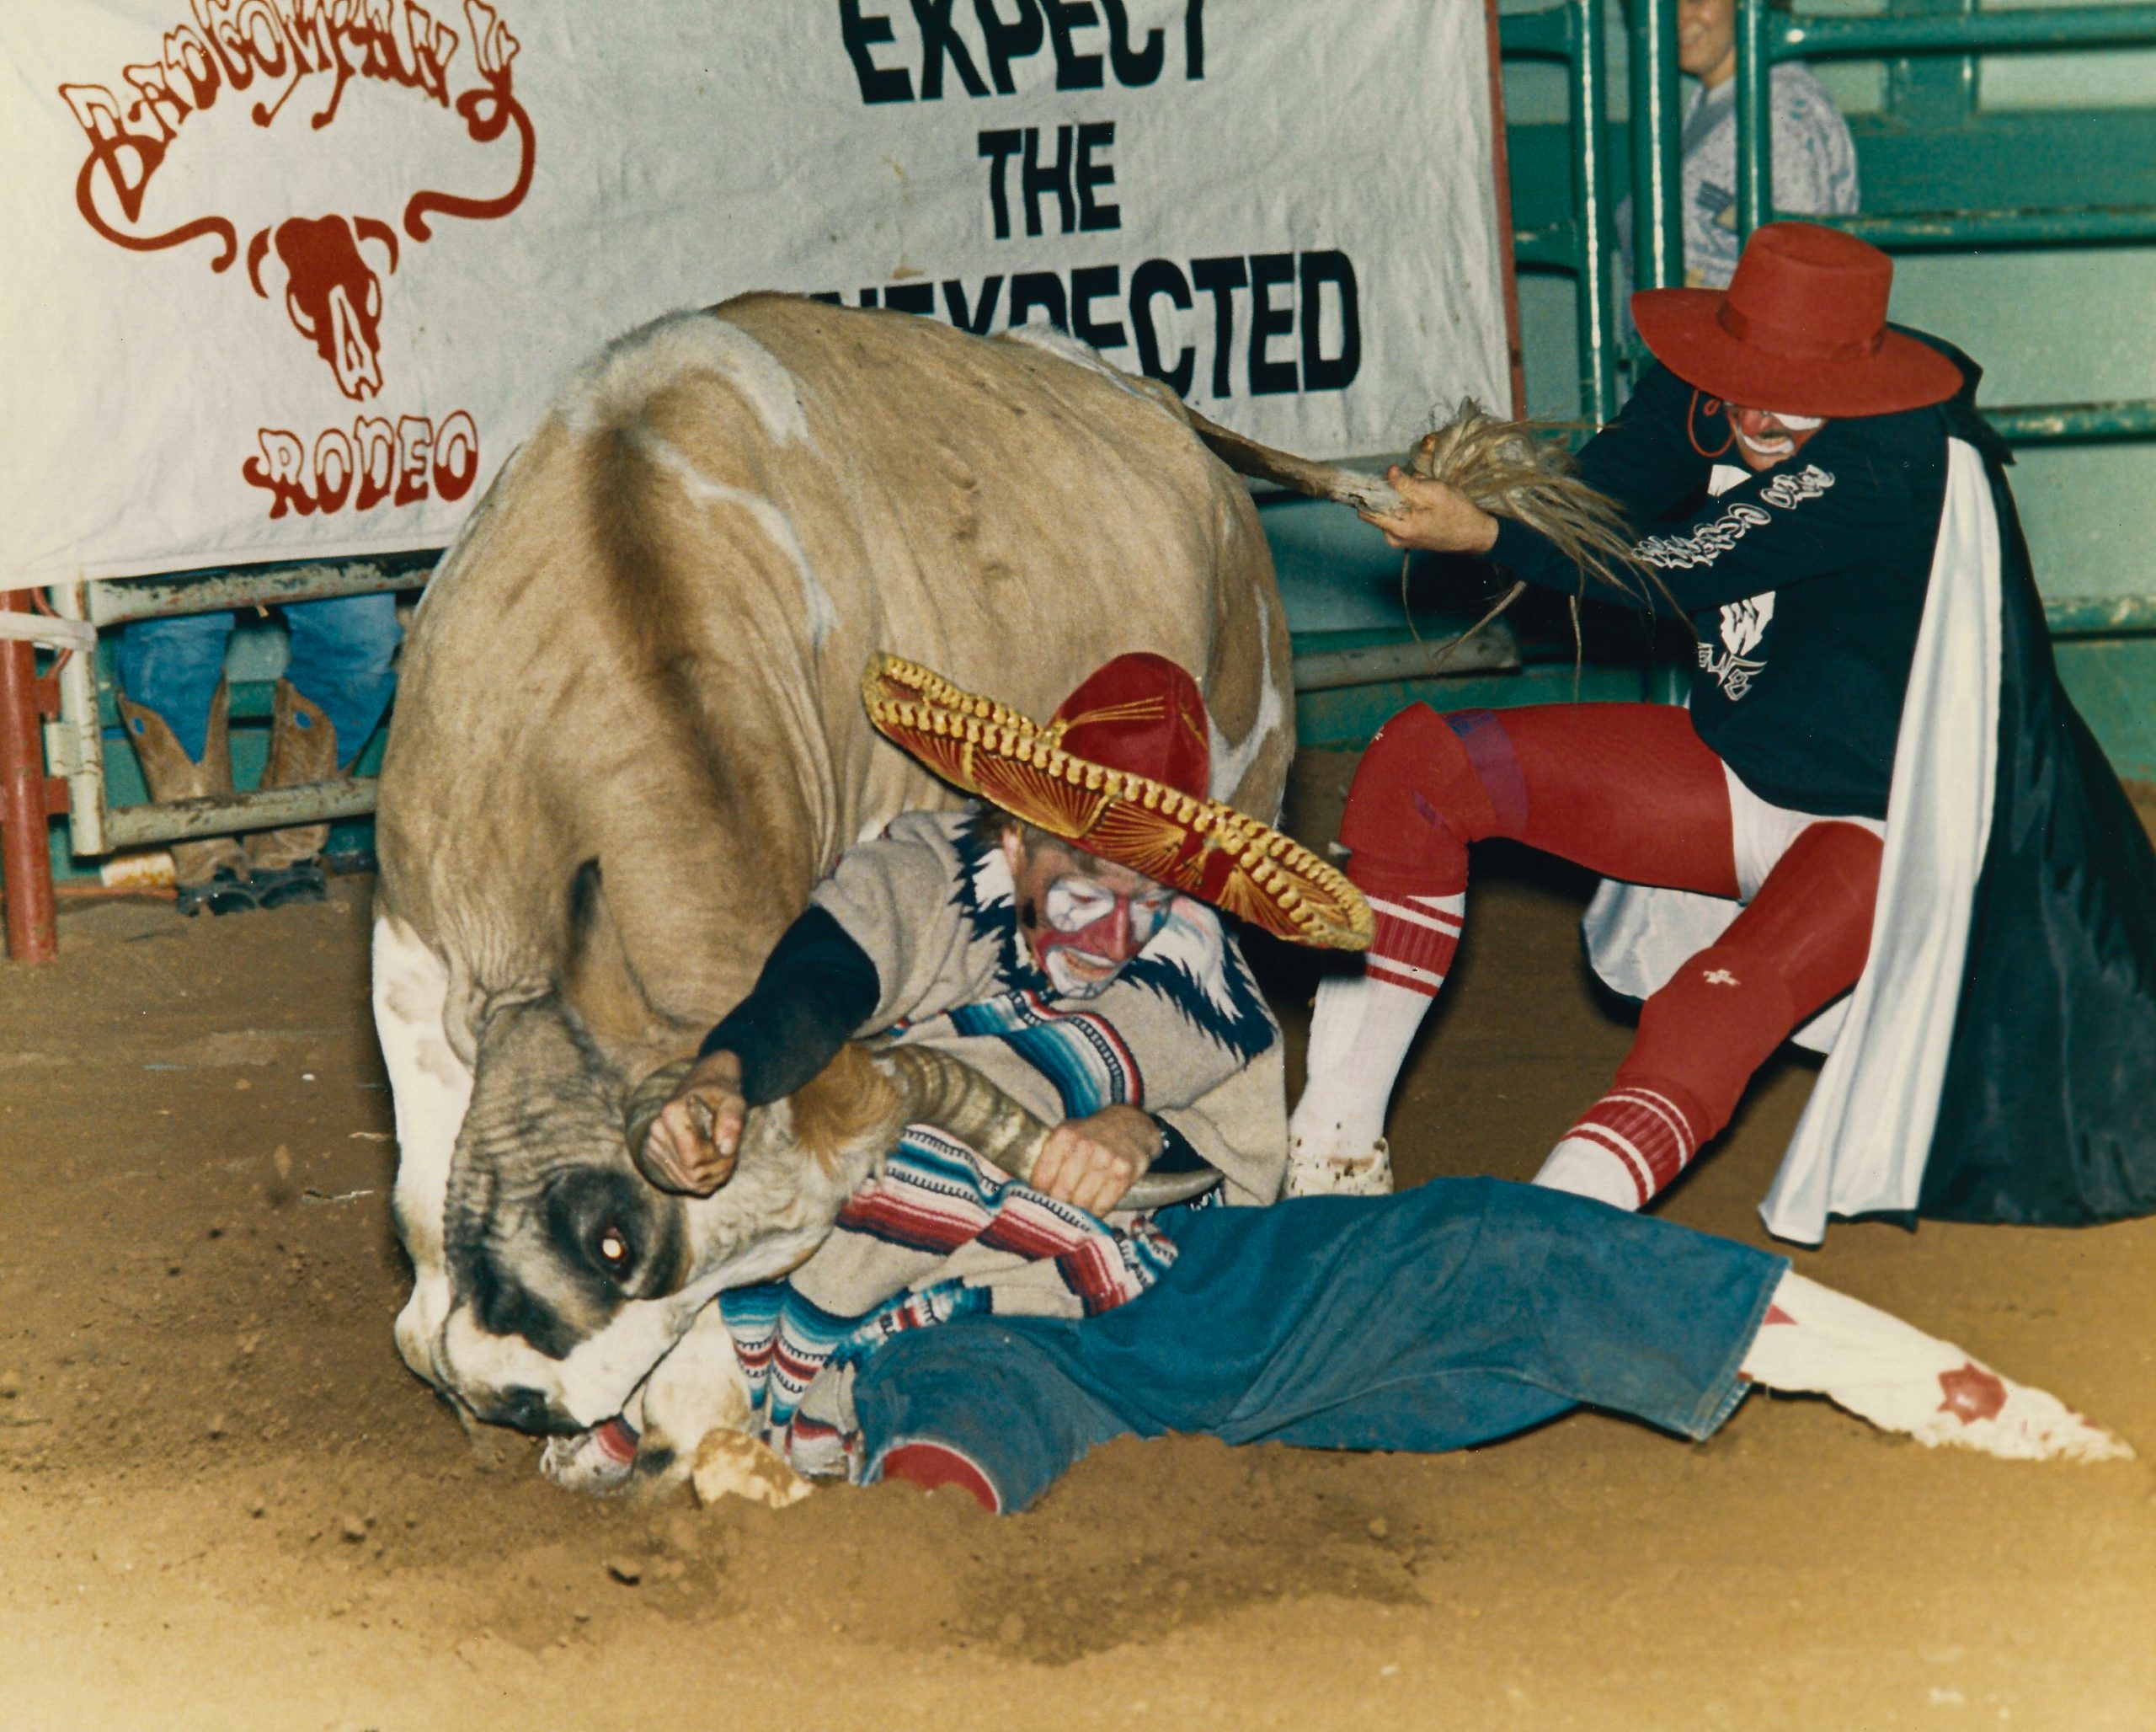 Rodeo personalities: Clowning around with famed bullfighter and